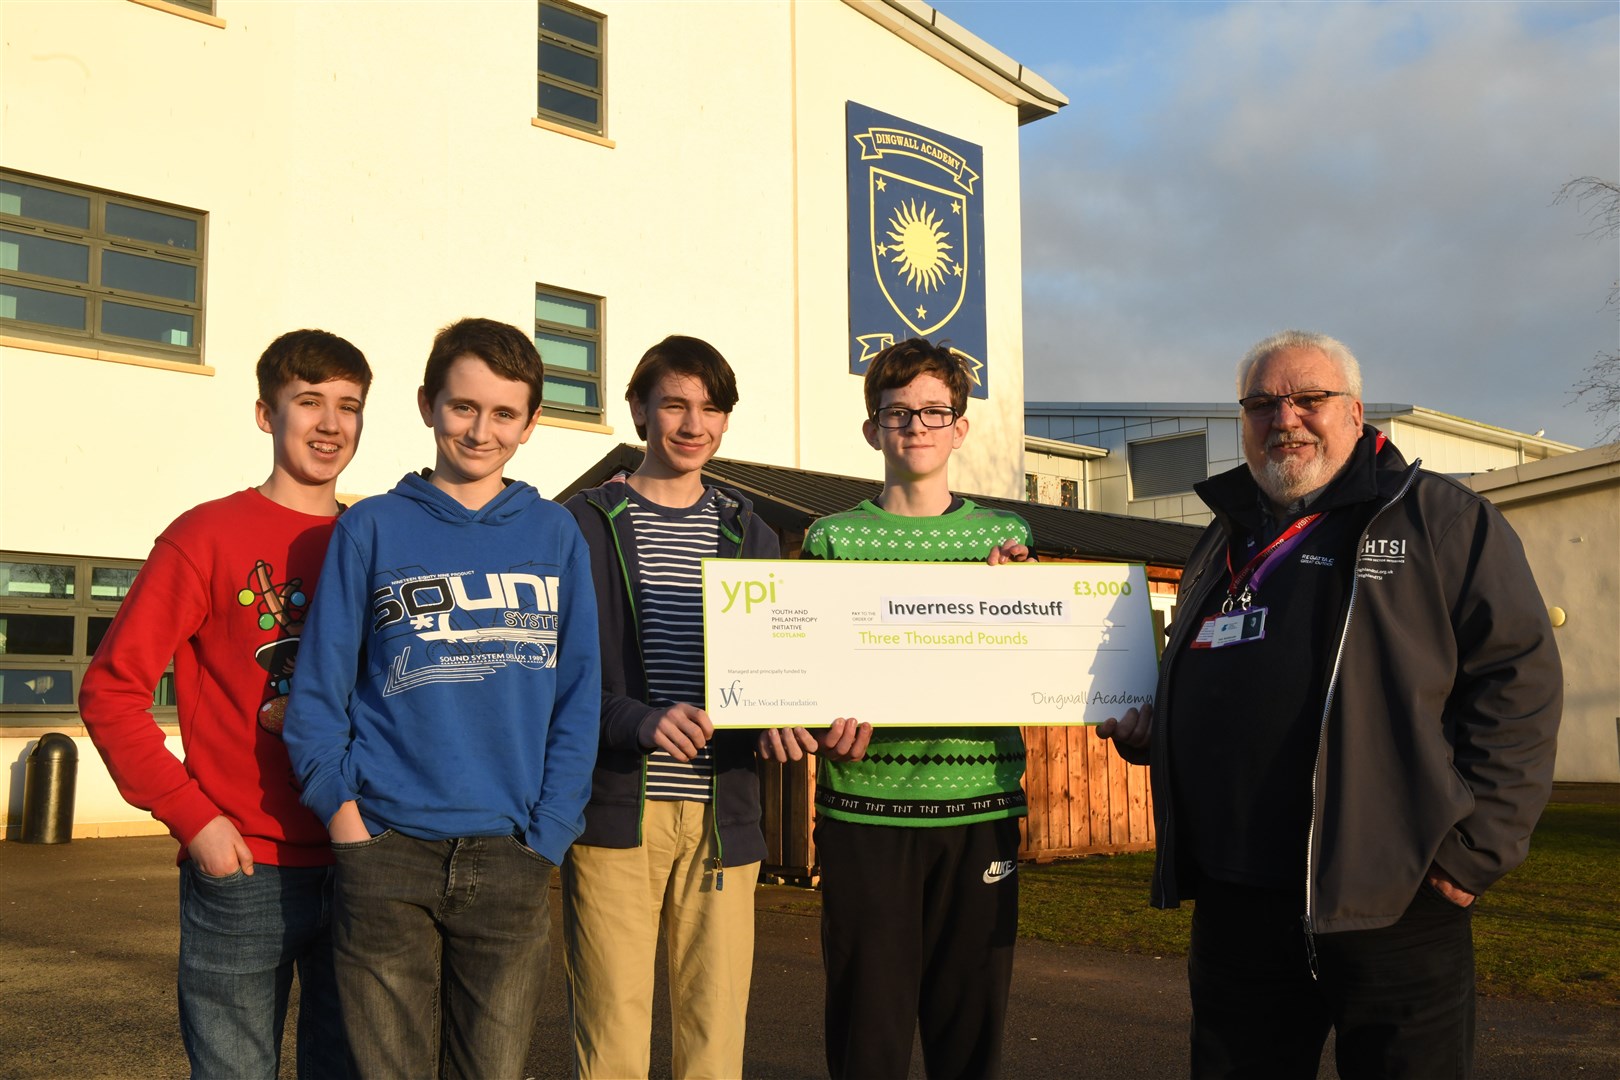 Dingwall Academy S3 pupils Harry Stewart, Seth Hitchen, Magnus Atkinson and Angus Porter hand over their winnings to Iain McKenzie, vice chairman of Inverness Foodstuff. Picture: James Mackenzie.